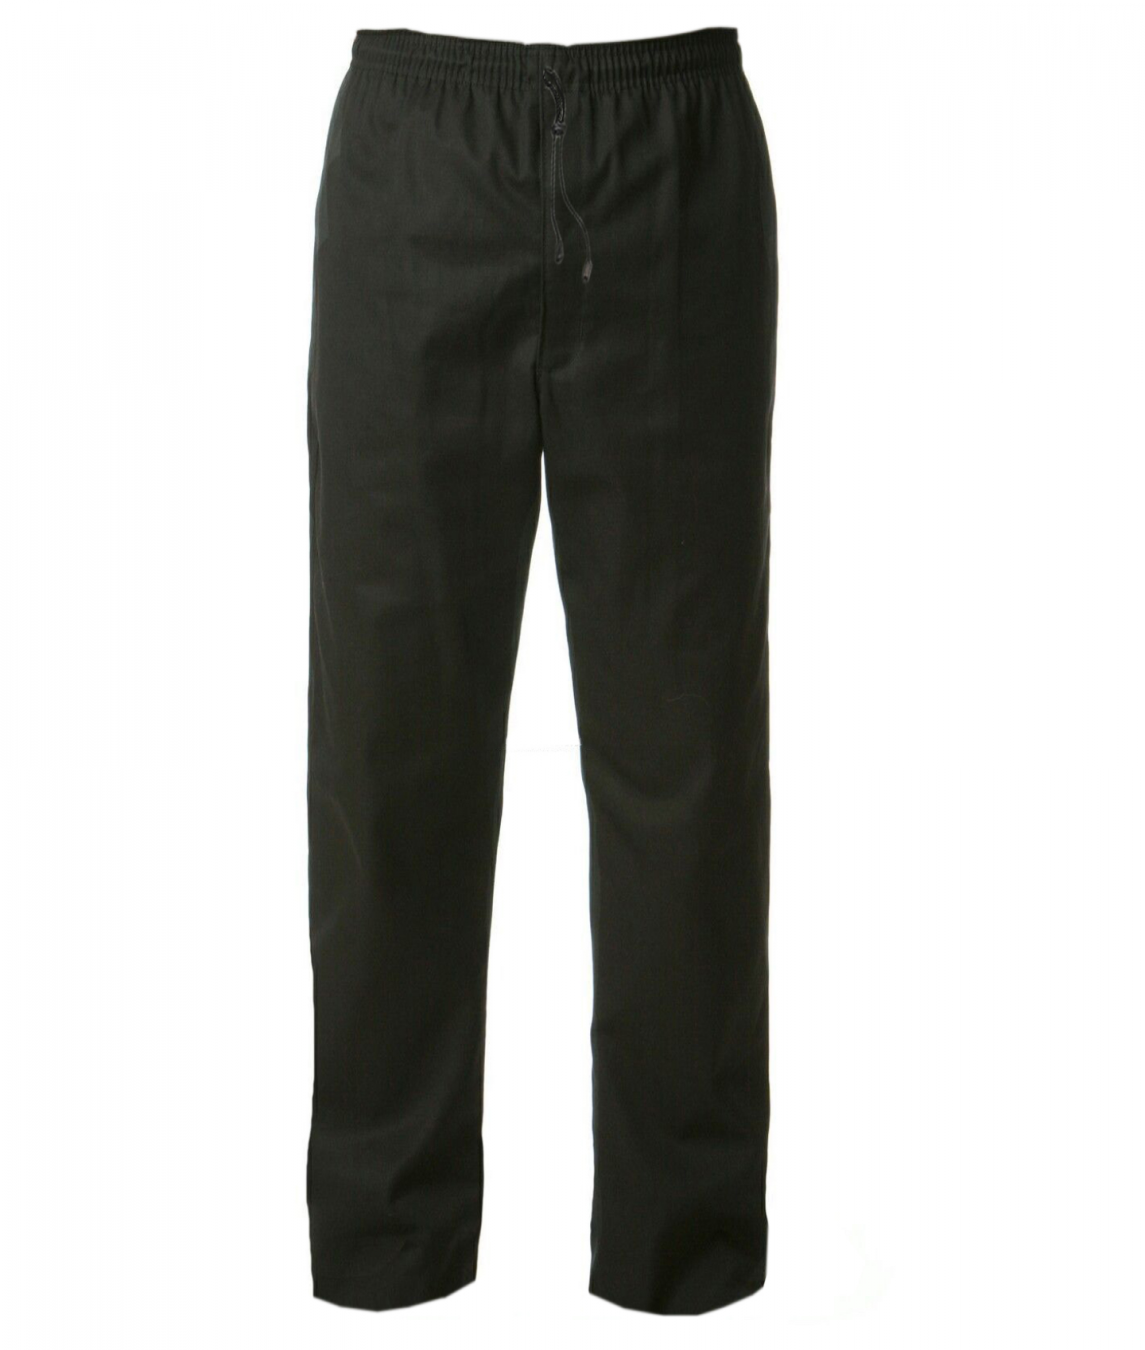 Fusion Chef trousers